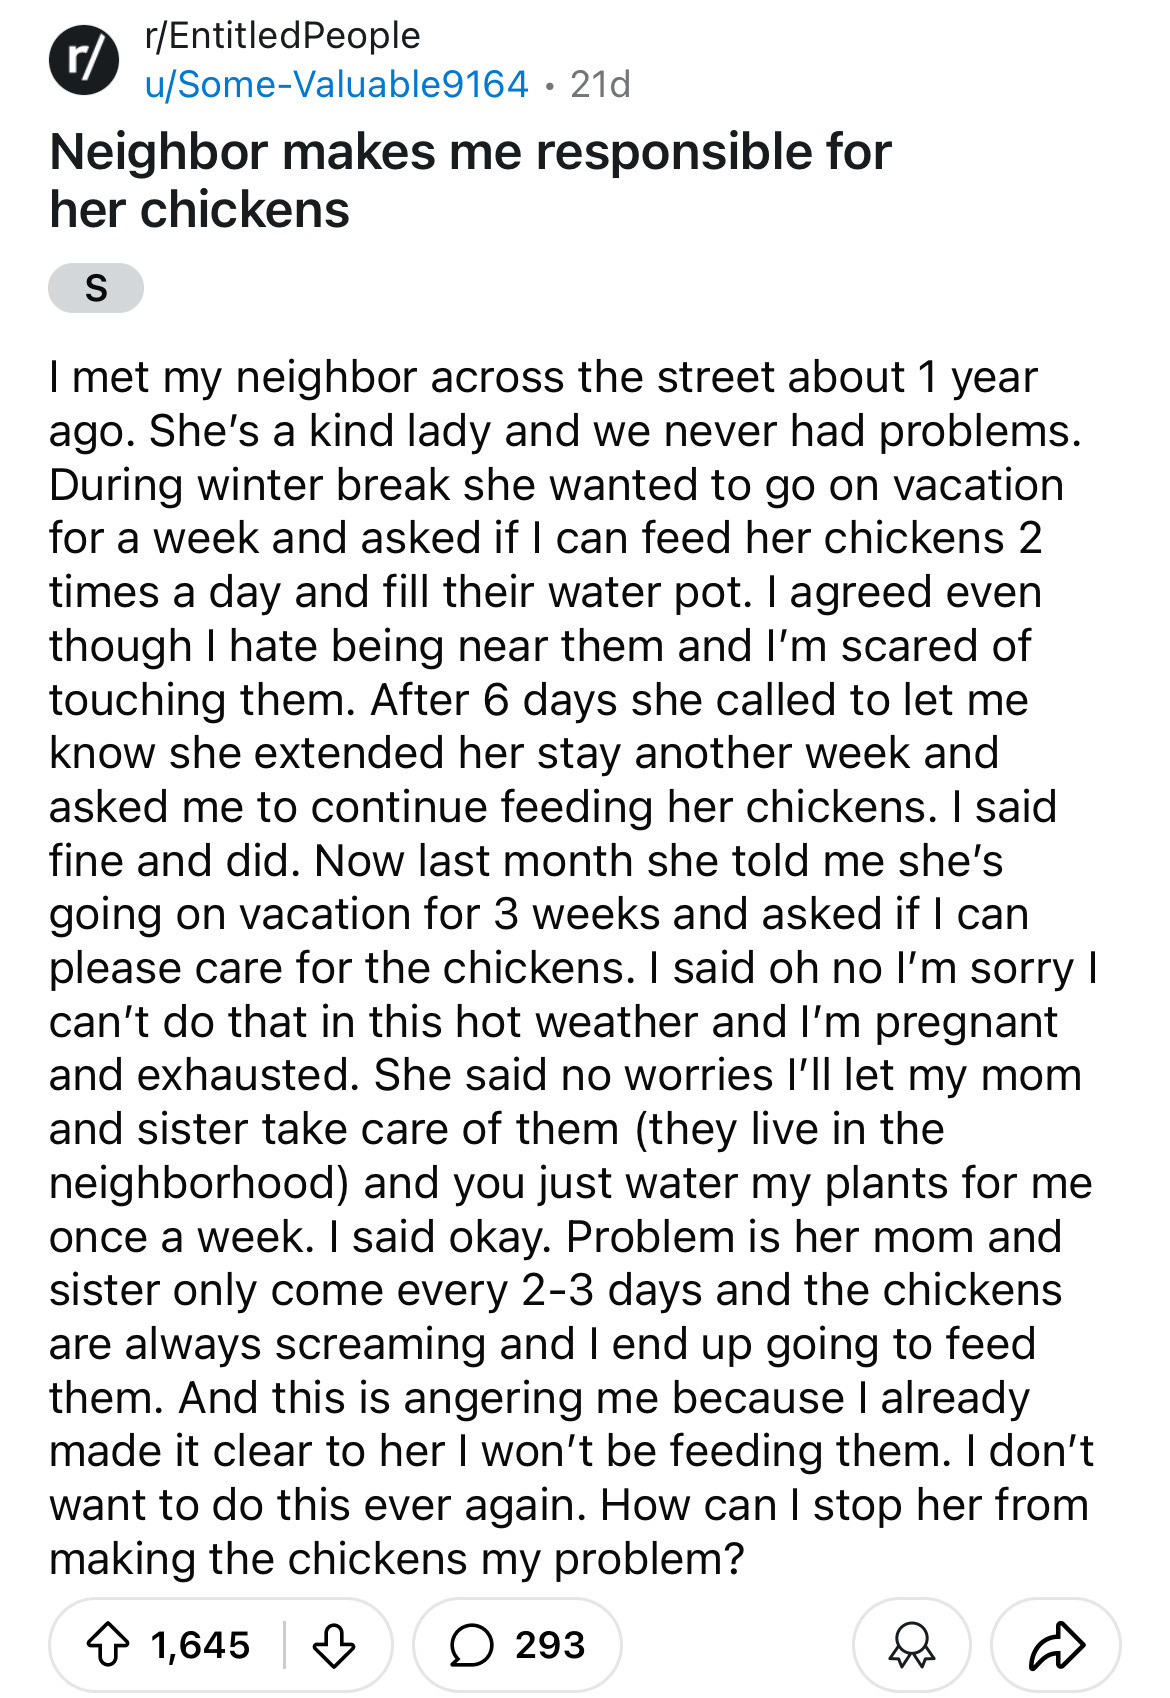 document - rEntitled People uSomeValuable9164.21d Neighbor makes me responsible for her chickens S I met my neighbor across the street about 1 year ago. She's a kind lady and we never had problems. During winter break she wanted to go on vacation for a we